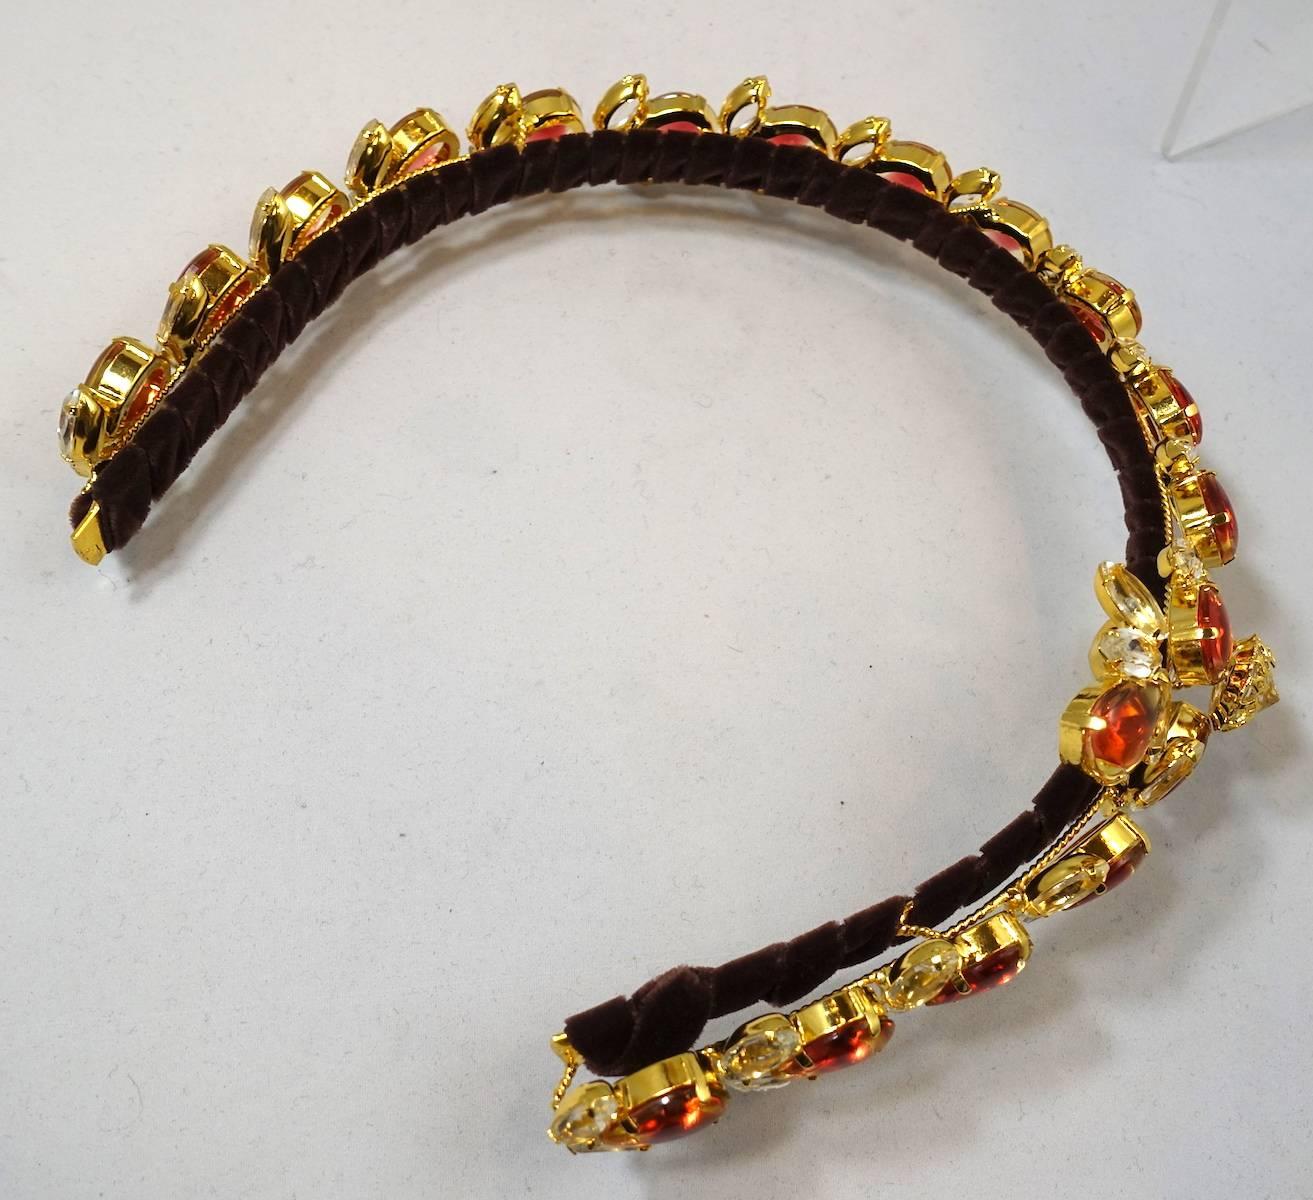 Robert Sorrell has done it again! He has created yet another headband that is unique. This one has orange and clear crystals in a floral design. The headband is in a rich gold tone setting wrapped around in brown velvet. It measures 17” x 1”. It is